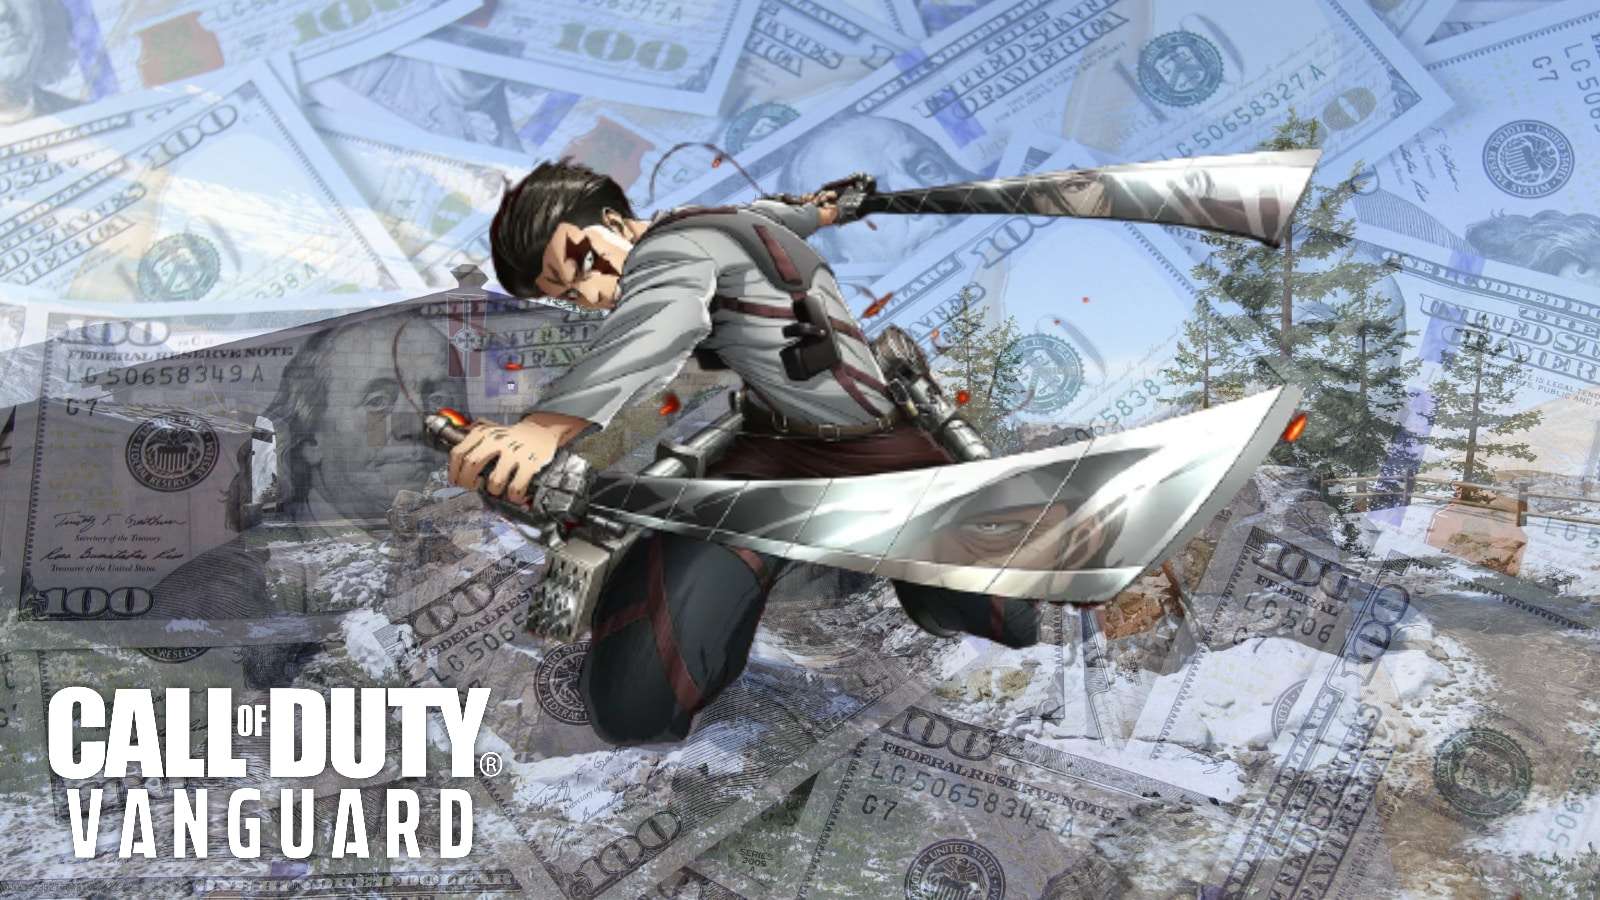 CoD Vanguard Attack on Titan bundle is secretly pay-to-win